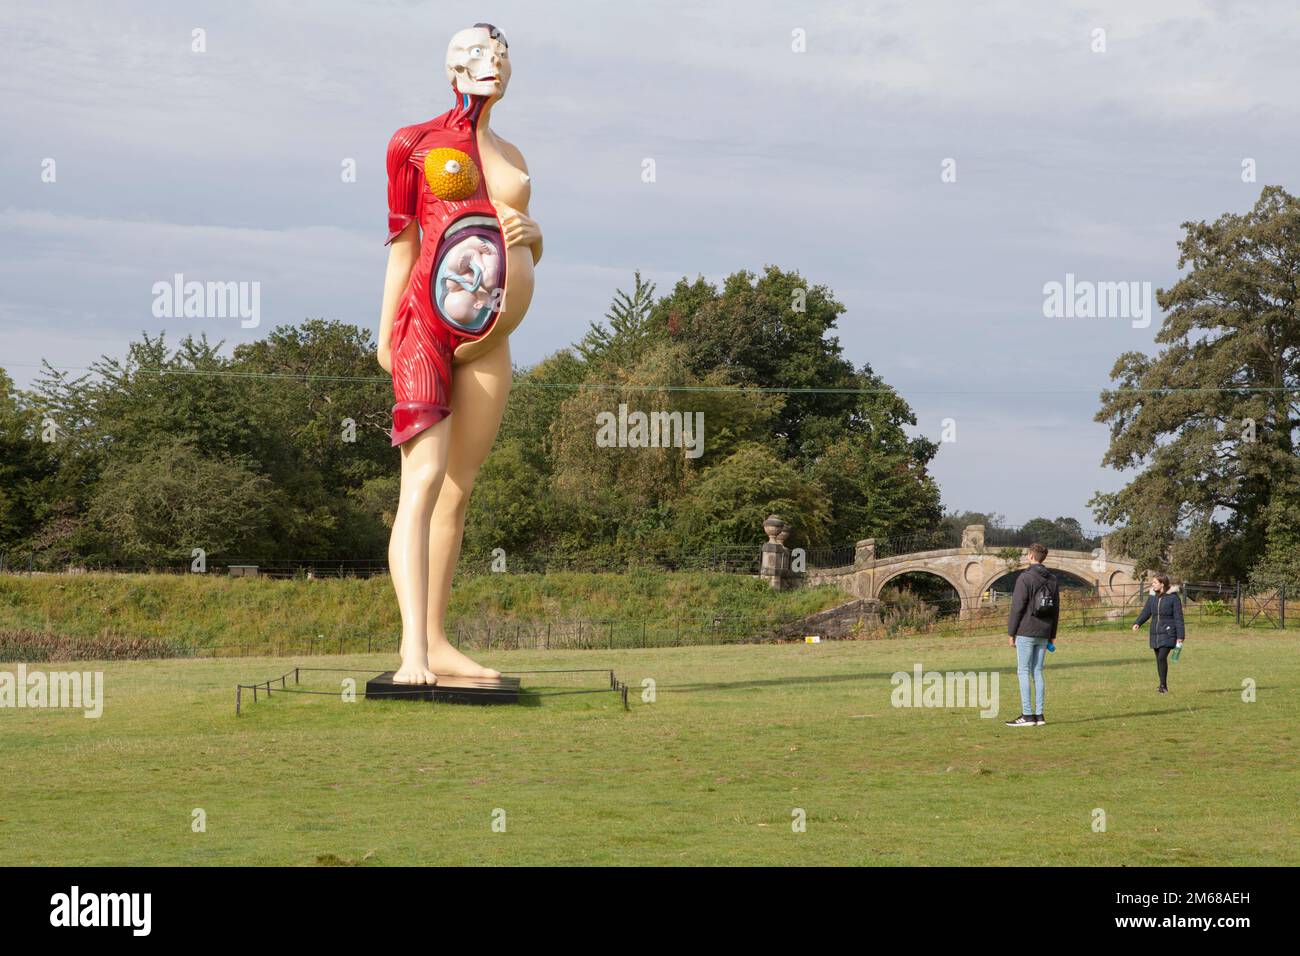 The Virgin Mother by artist Damien Hirst, here displayed at the Yorkshire Sculpture Park Stock Photo